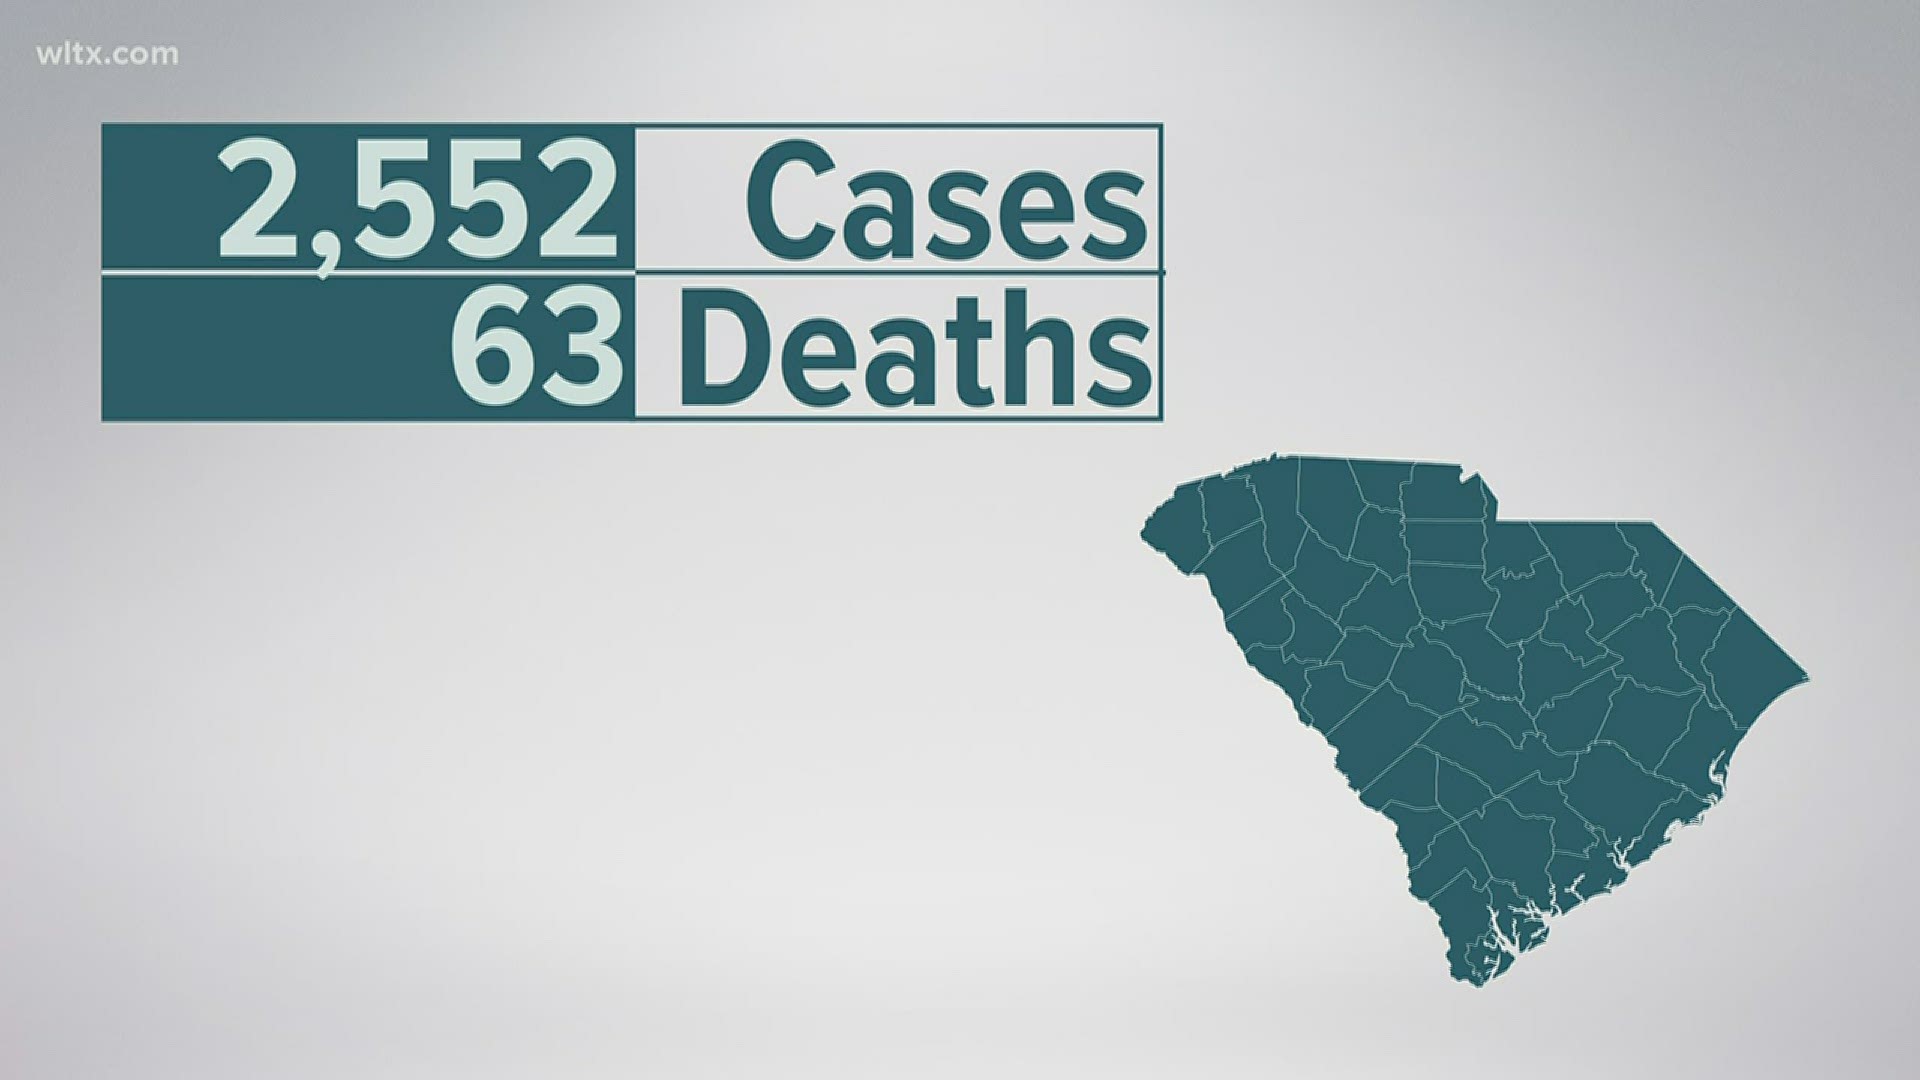 139 new cases were reported in South Carolina with 12 additional deaths